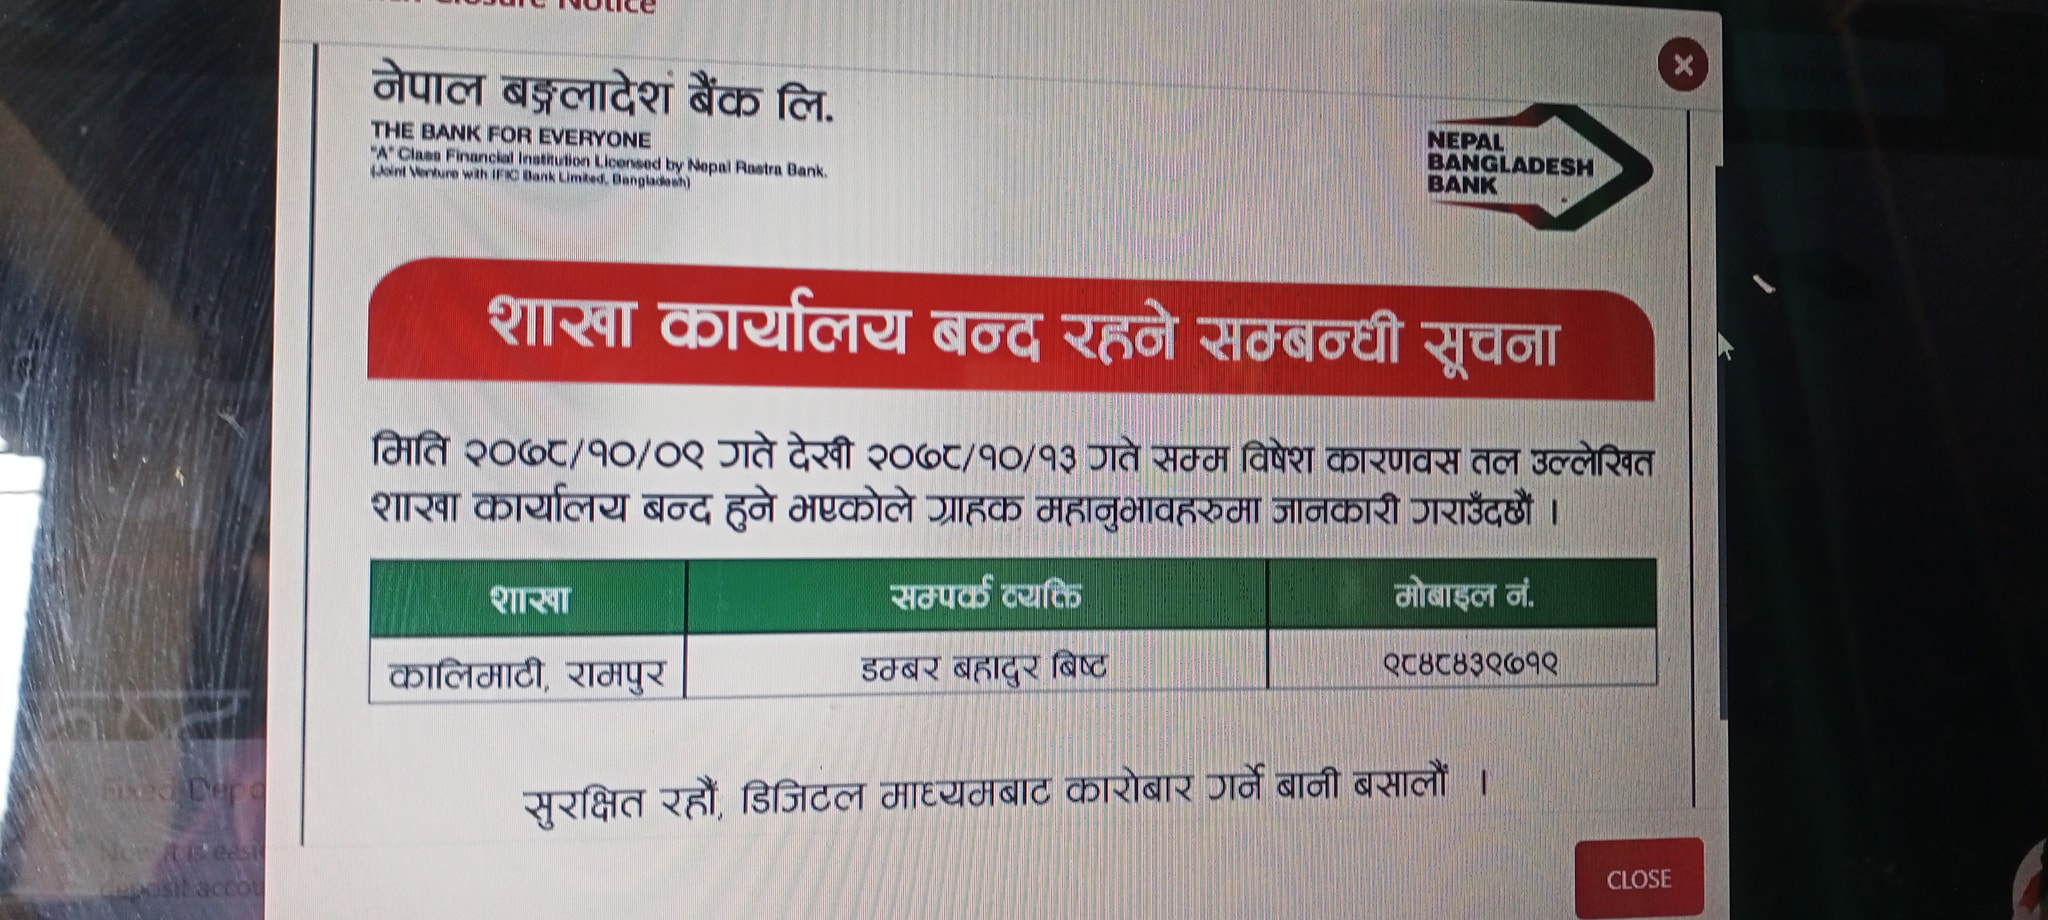 This notice reads a branch of Nepal Bangladesh Bank has been closed due to the rising coronavirus infections among the staff.